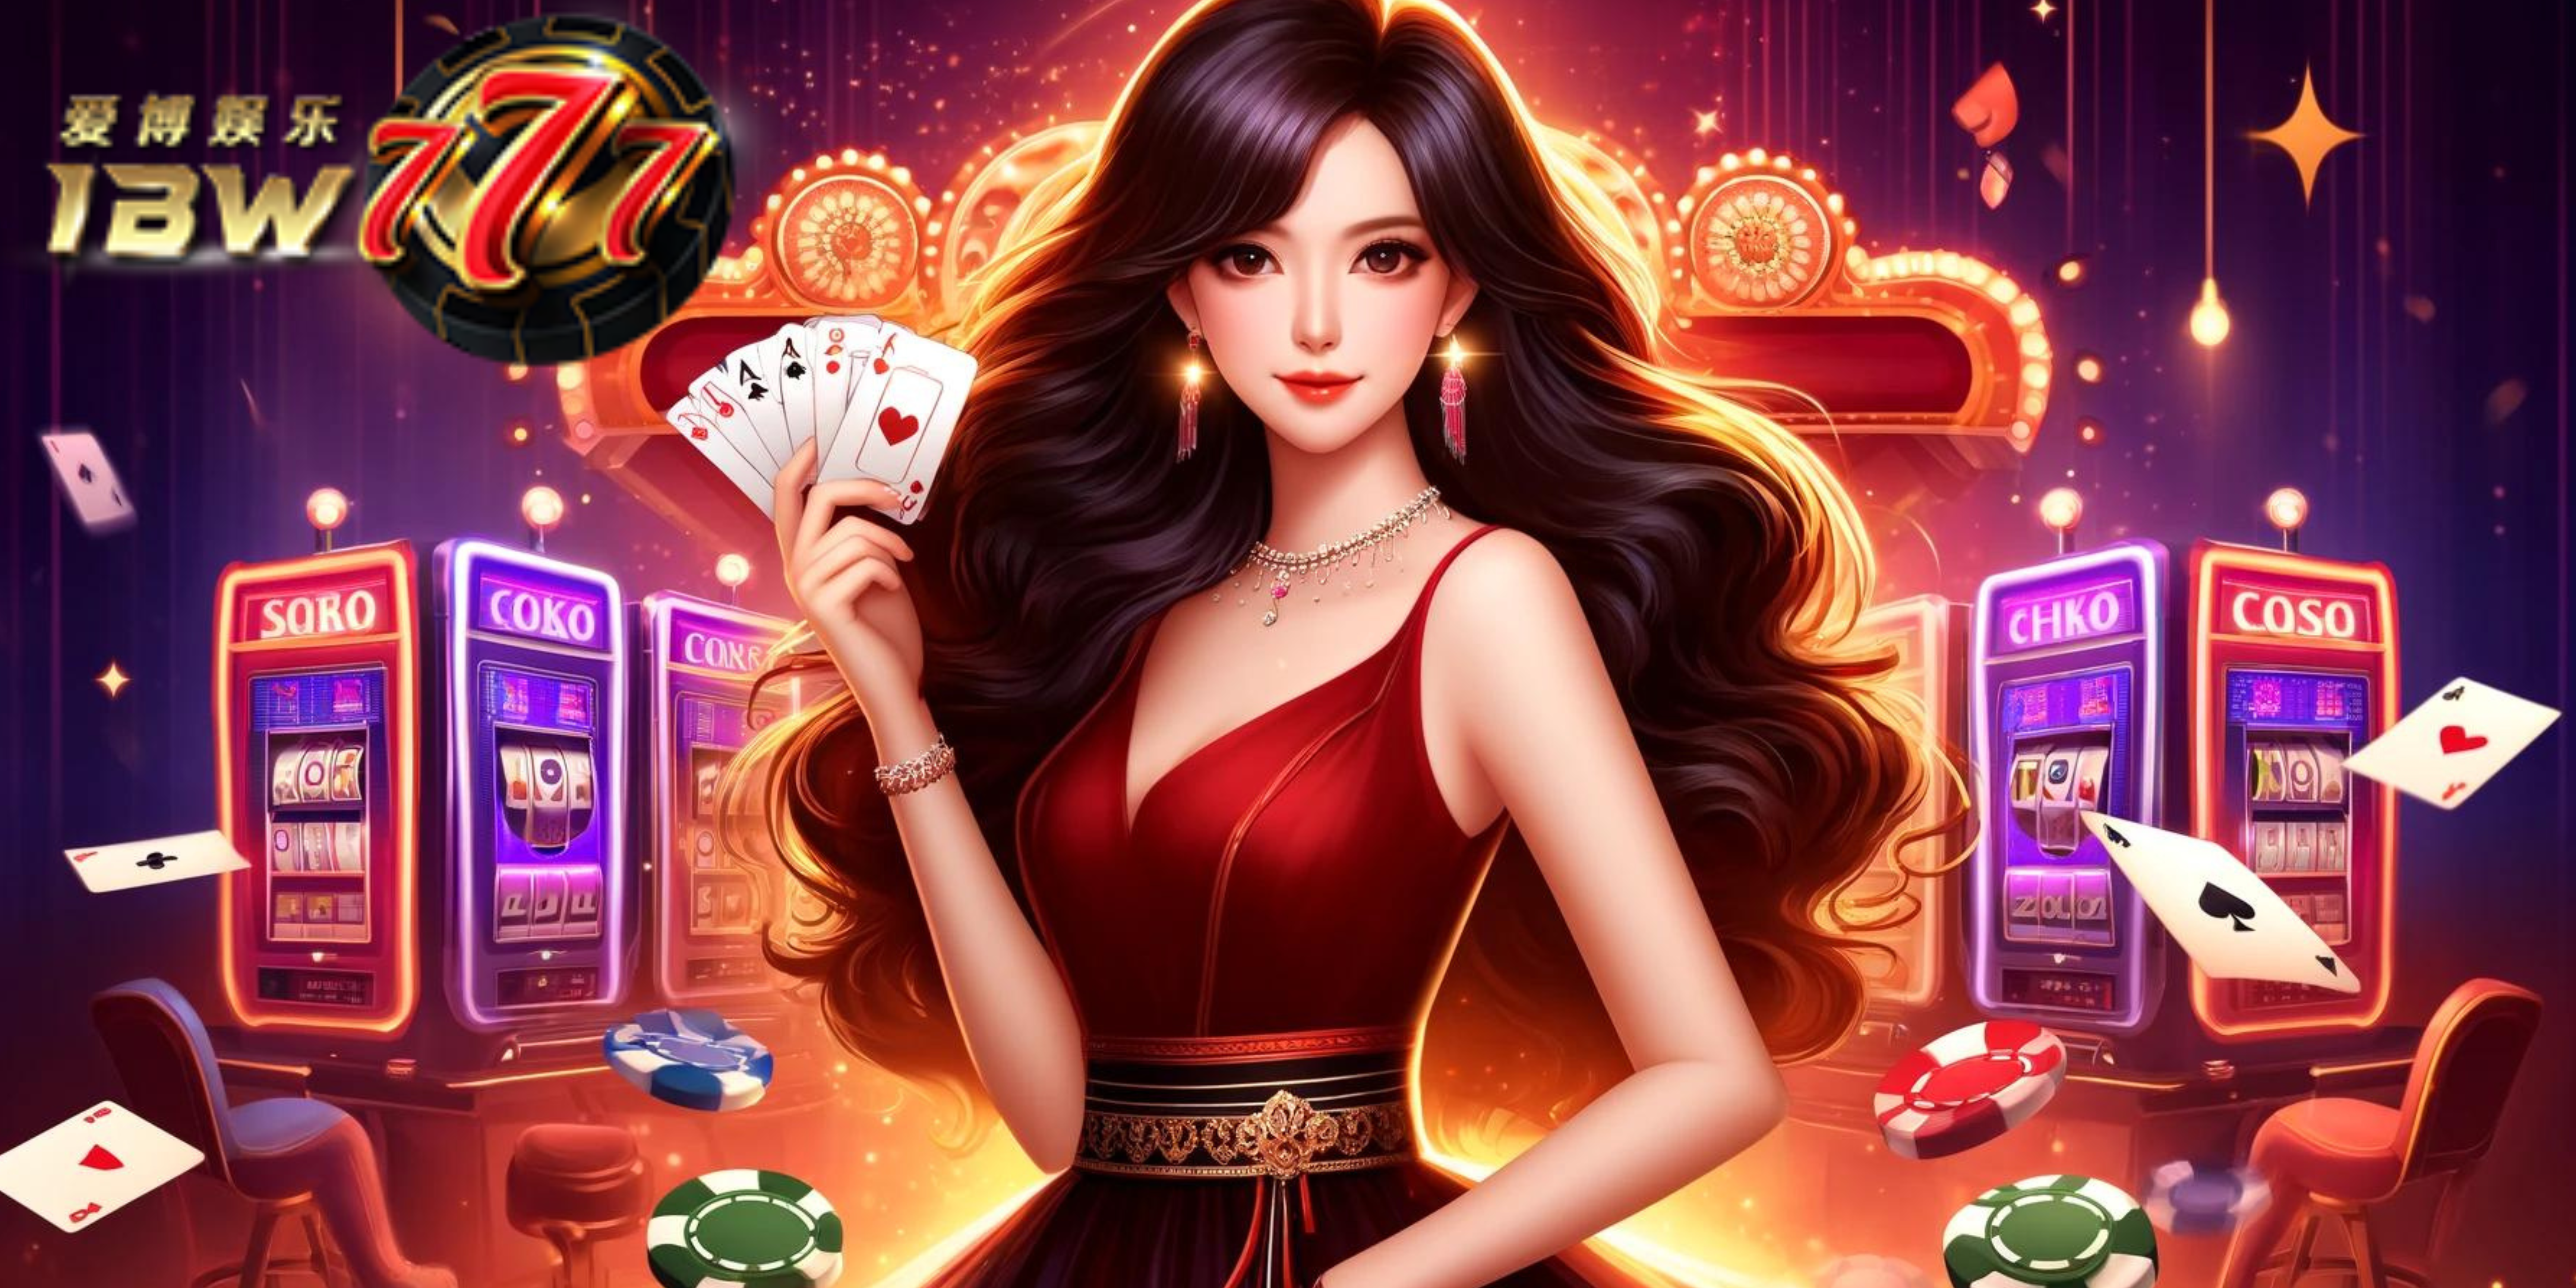 Play the casino Fun Games by Ibw777